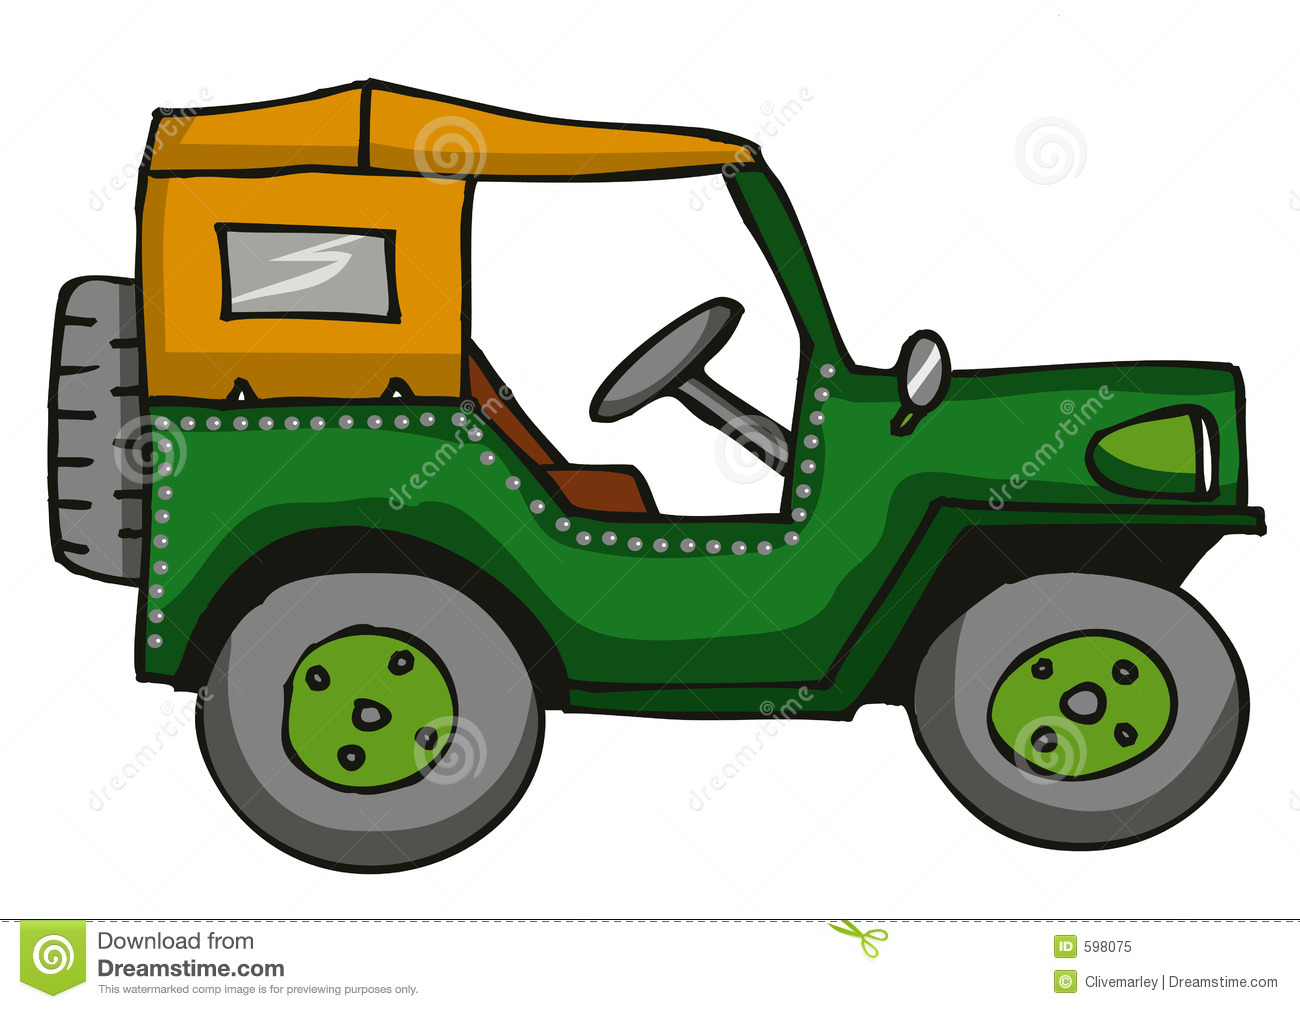 Jeep clipart 1 » Clipart Station.